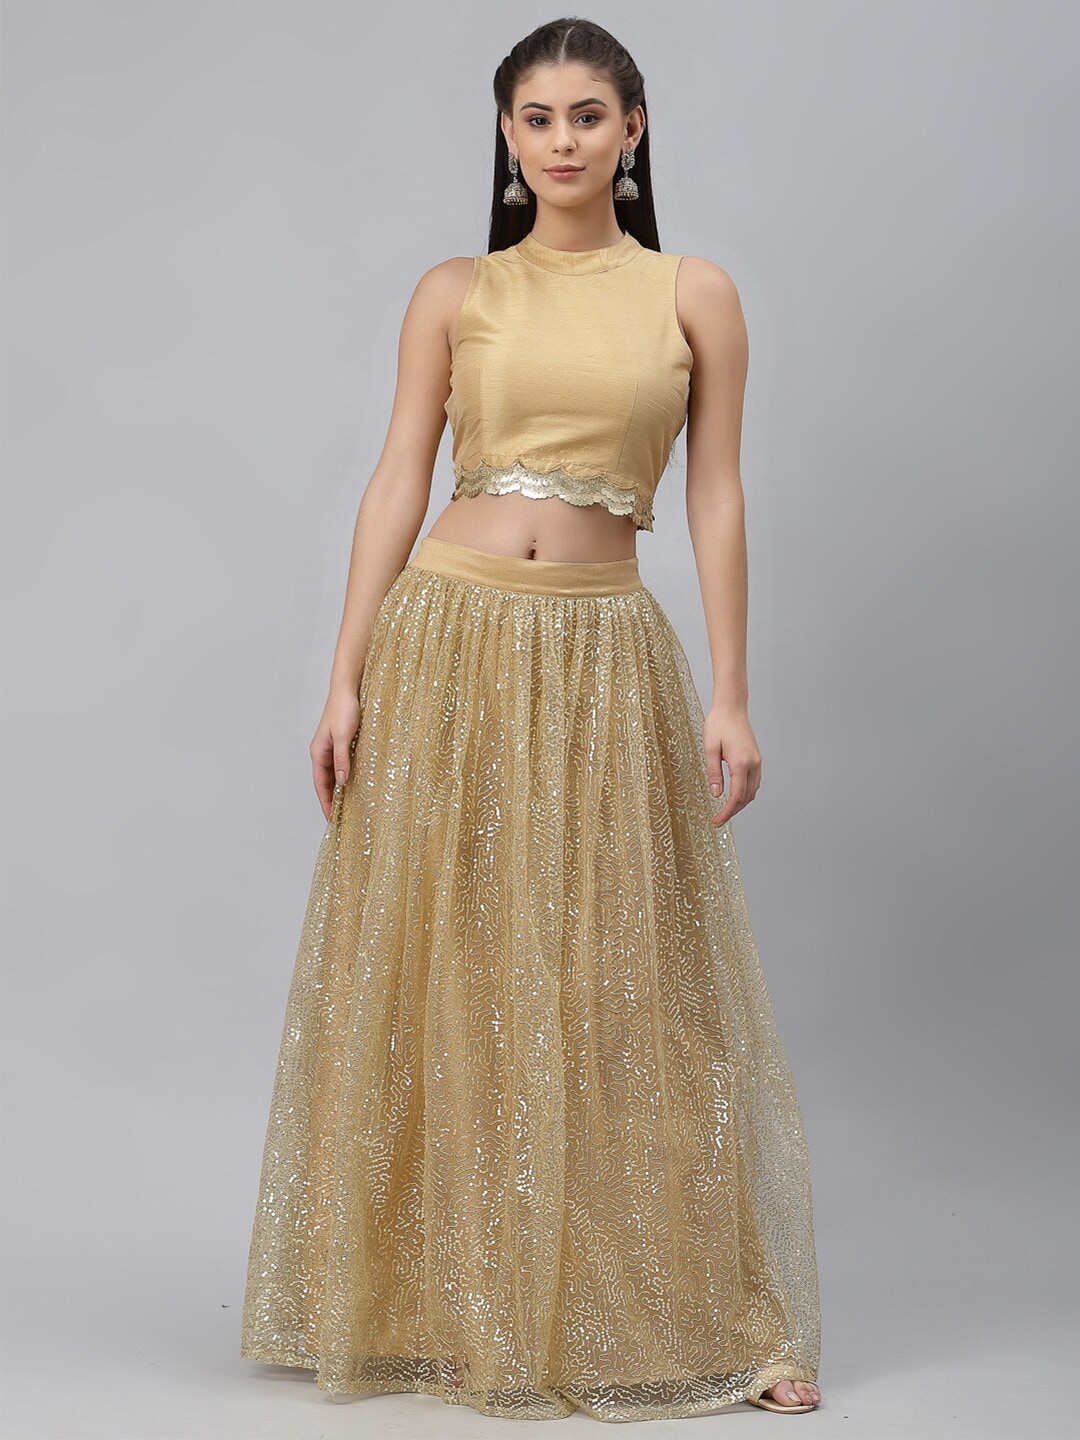 studio rasa Gold-Toned Embellished With Sequinned Ready to Wear Lehenga Set Price in India